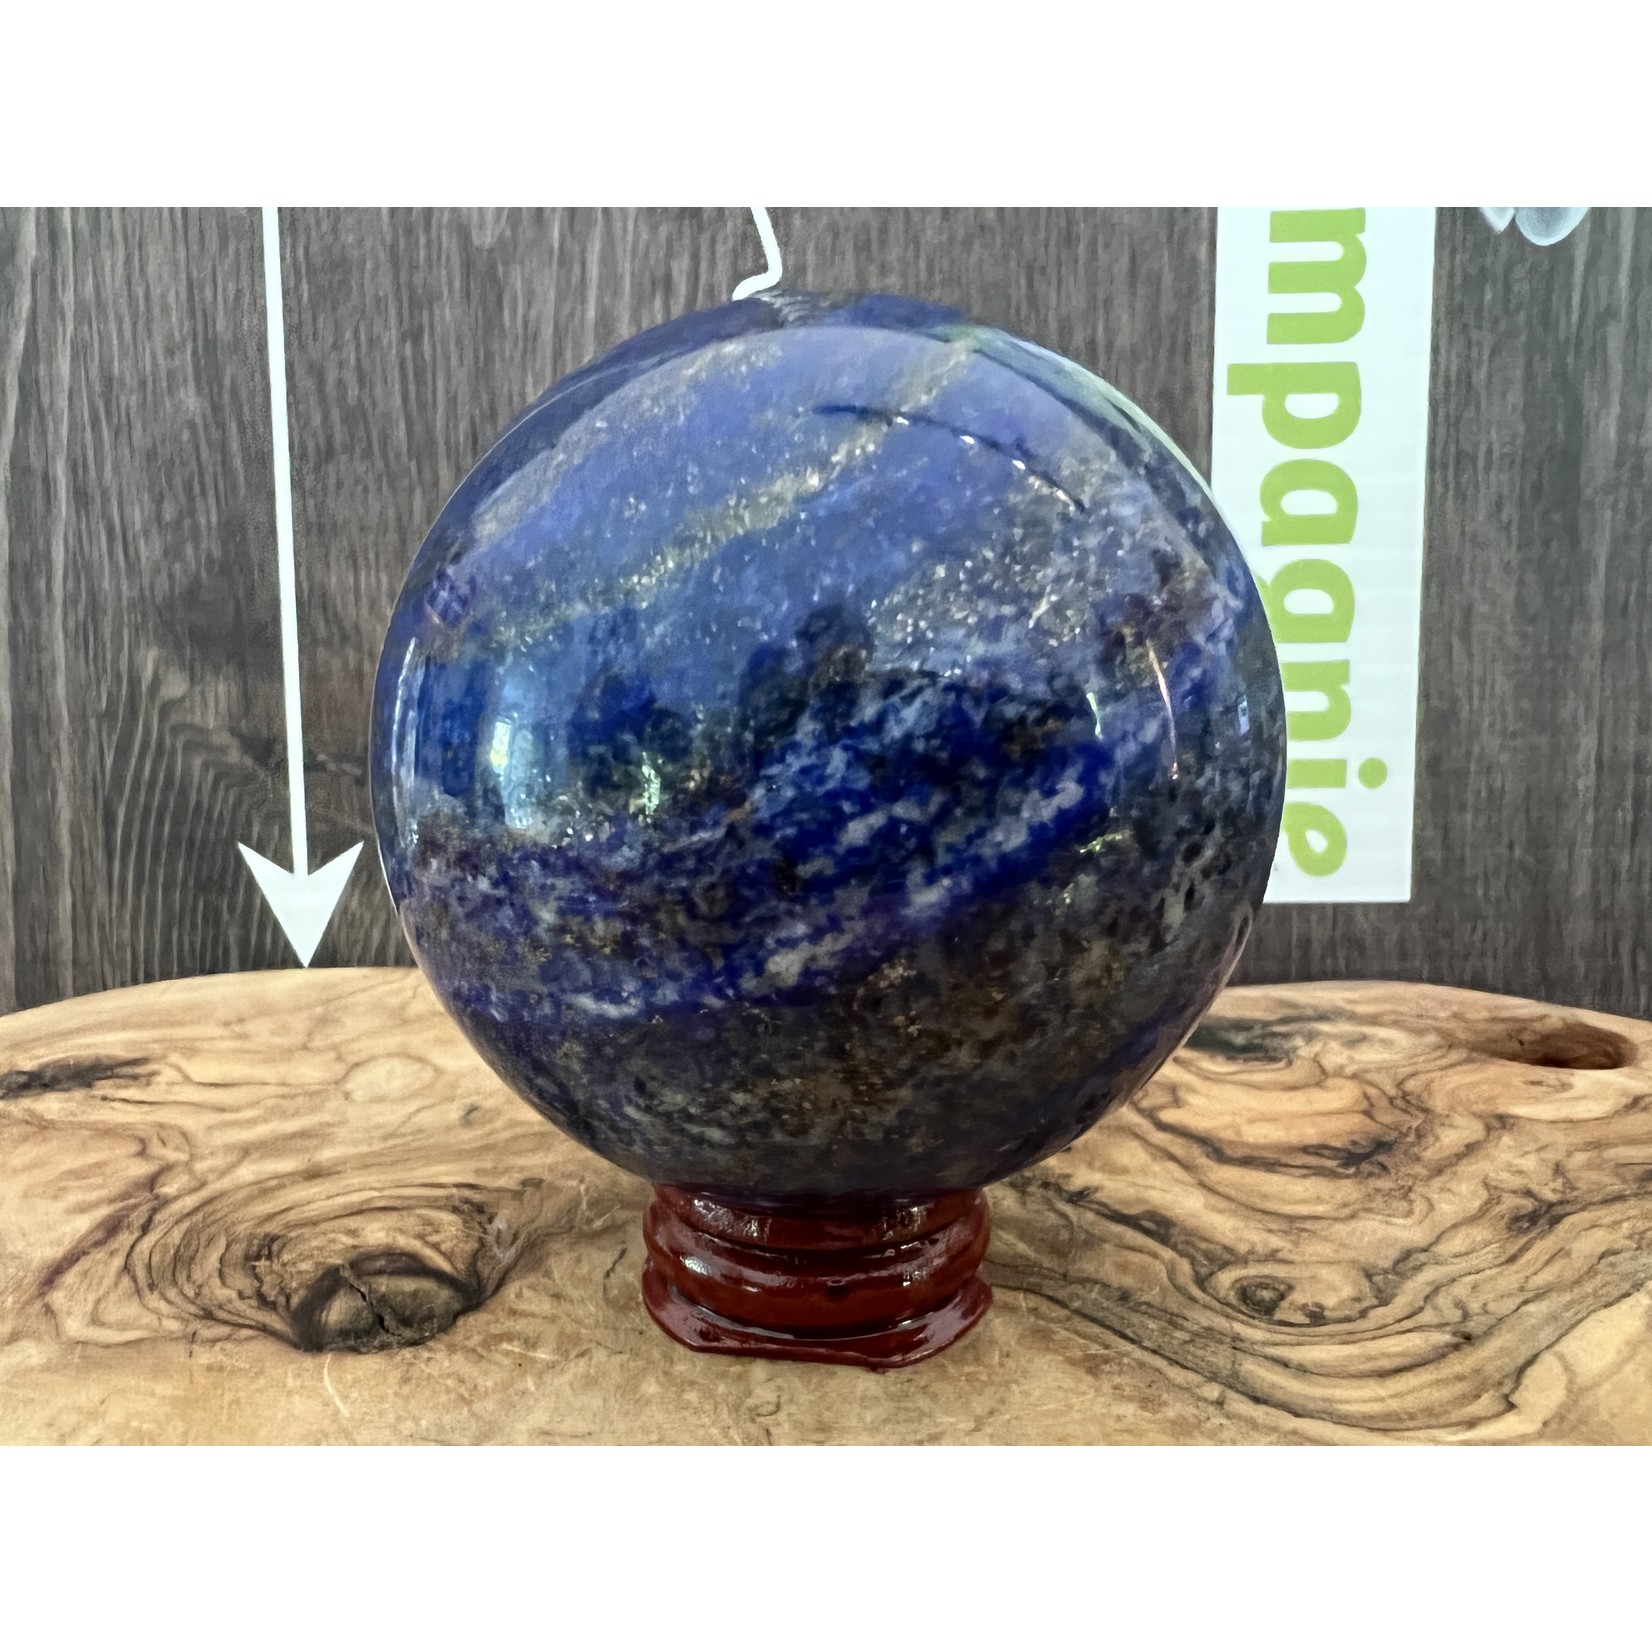 perfect wooden support for sphere, wooden base for crystal ball, handcrafted base in varnished red wood